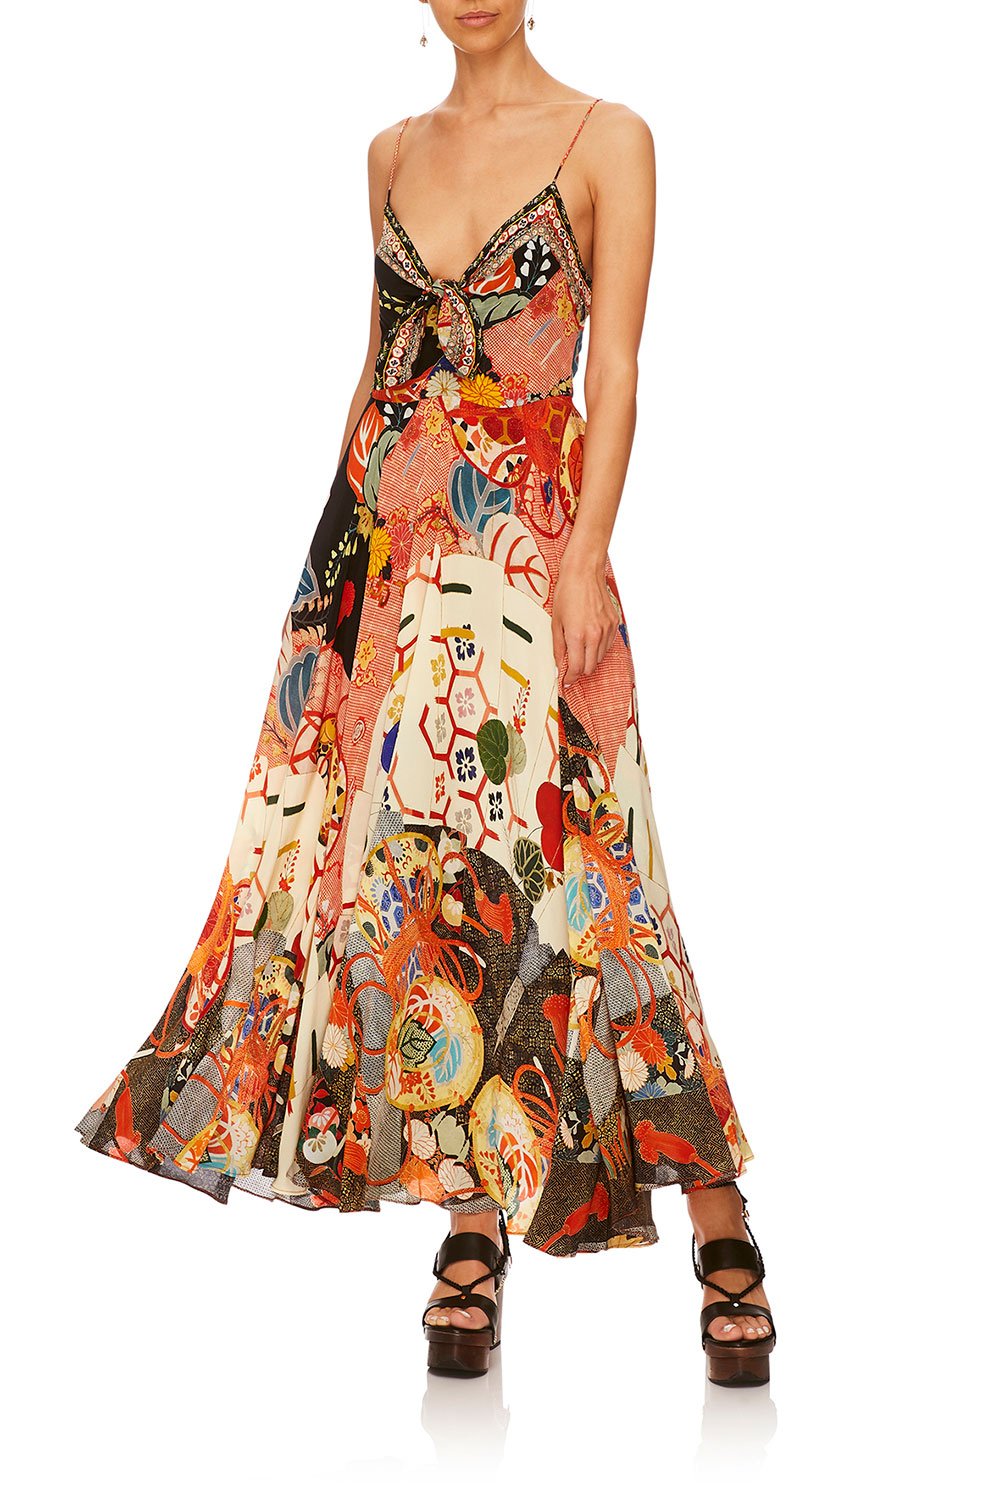 KISSING THE SUN LONG DRESS W TIE FRONT